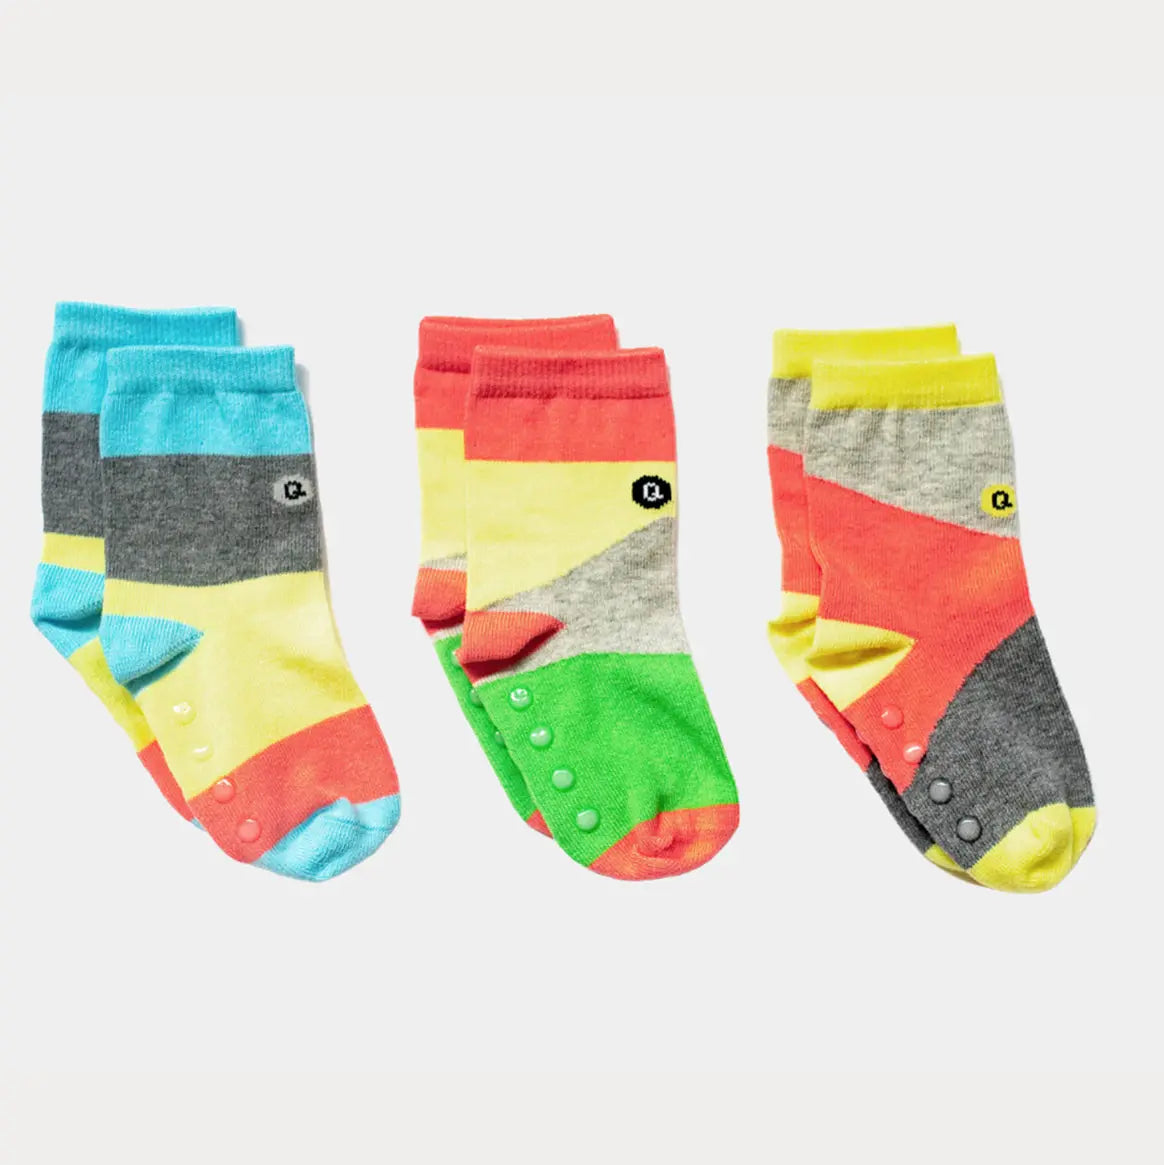 Mixed Patterns Baby Socks (3-pack) Q for Quinn